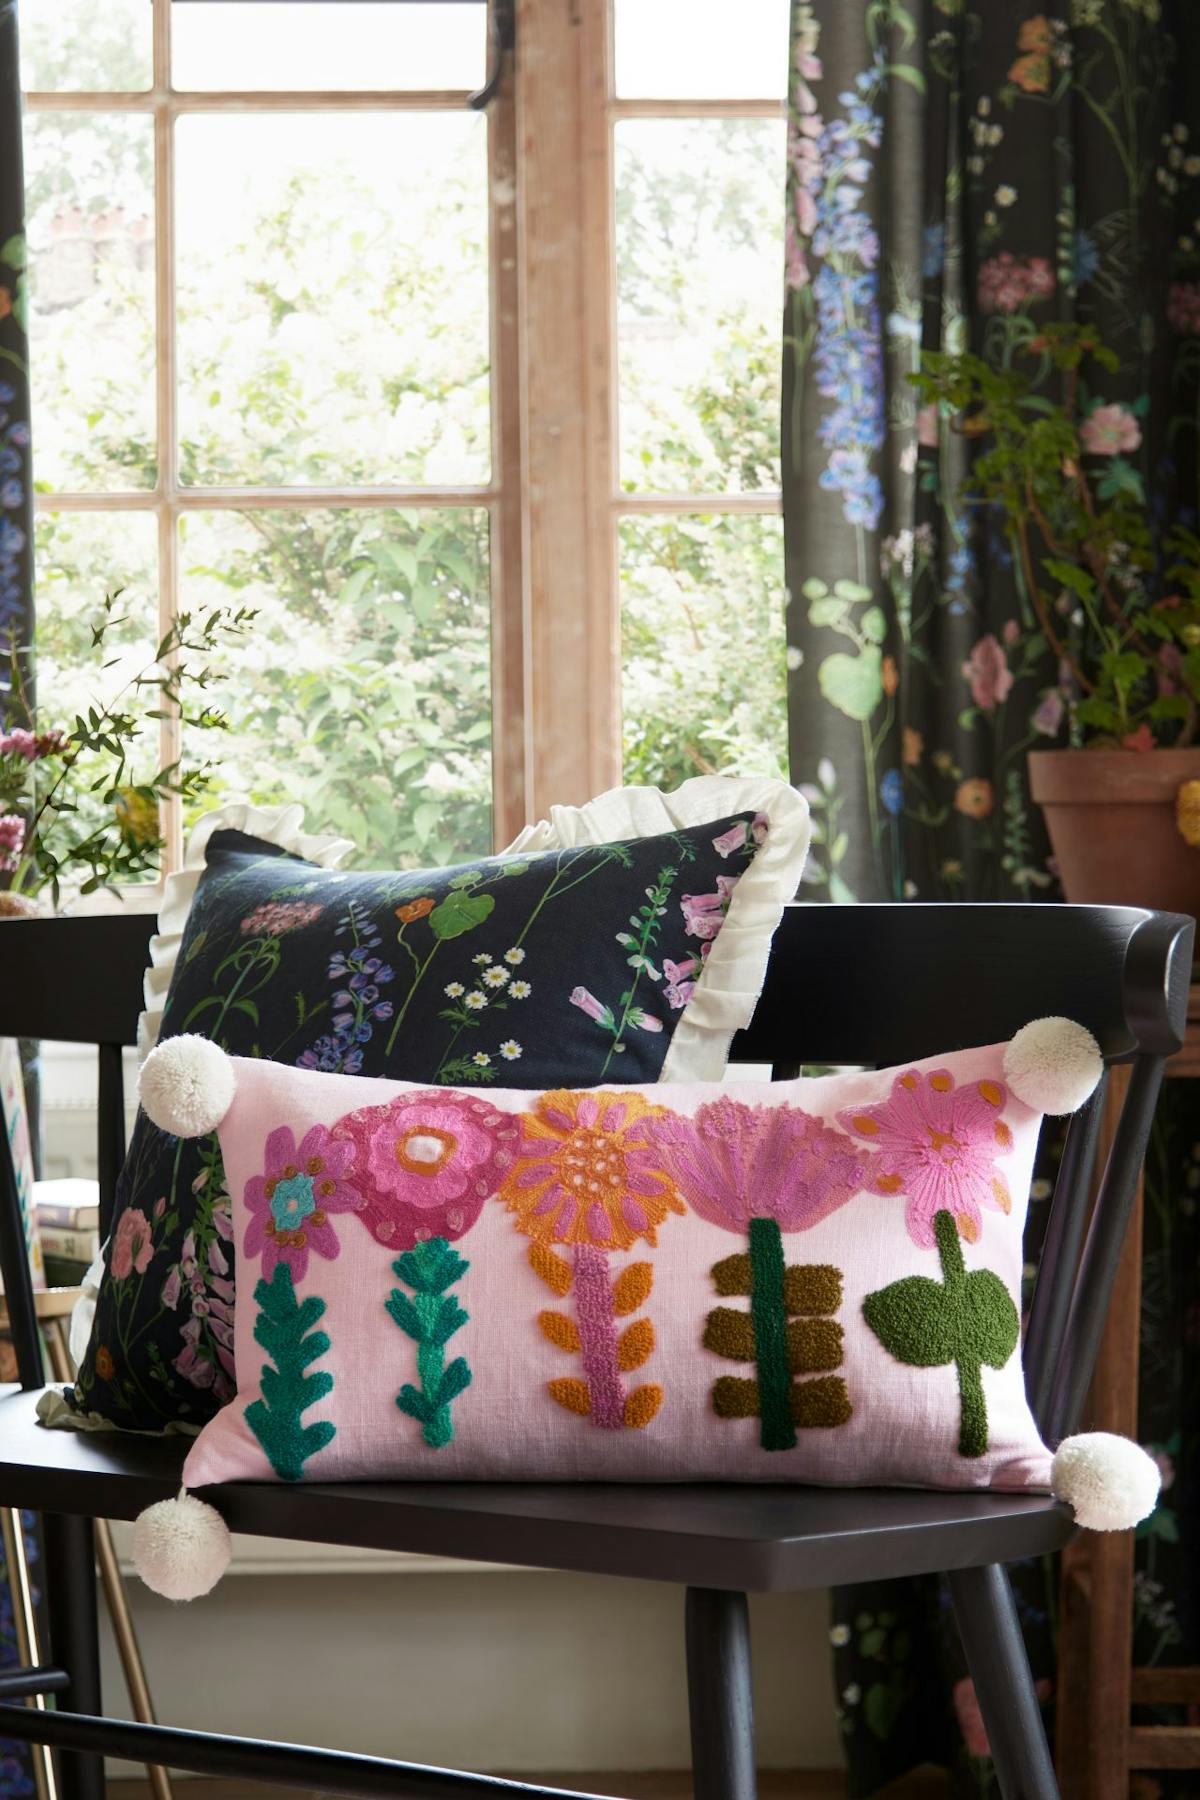 Next launches new homeware collection with designer Lucy Tiffney